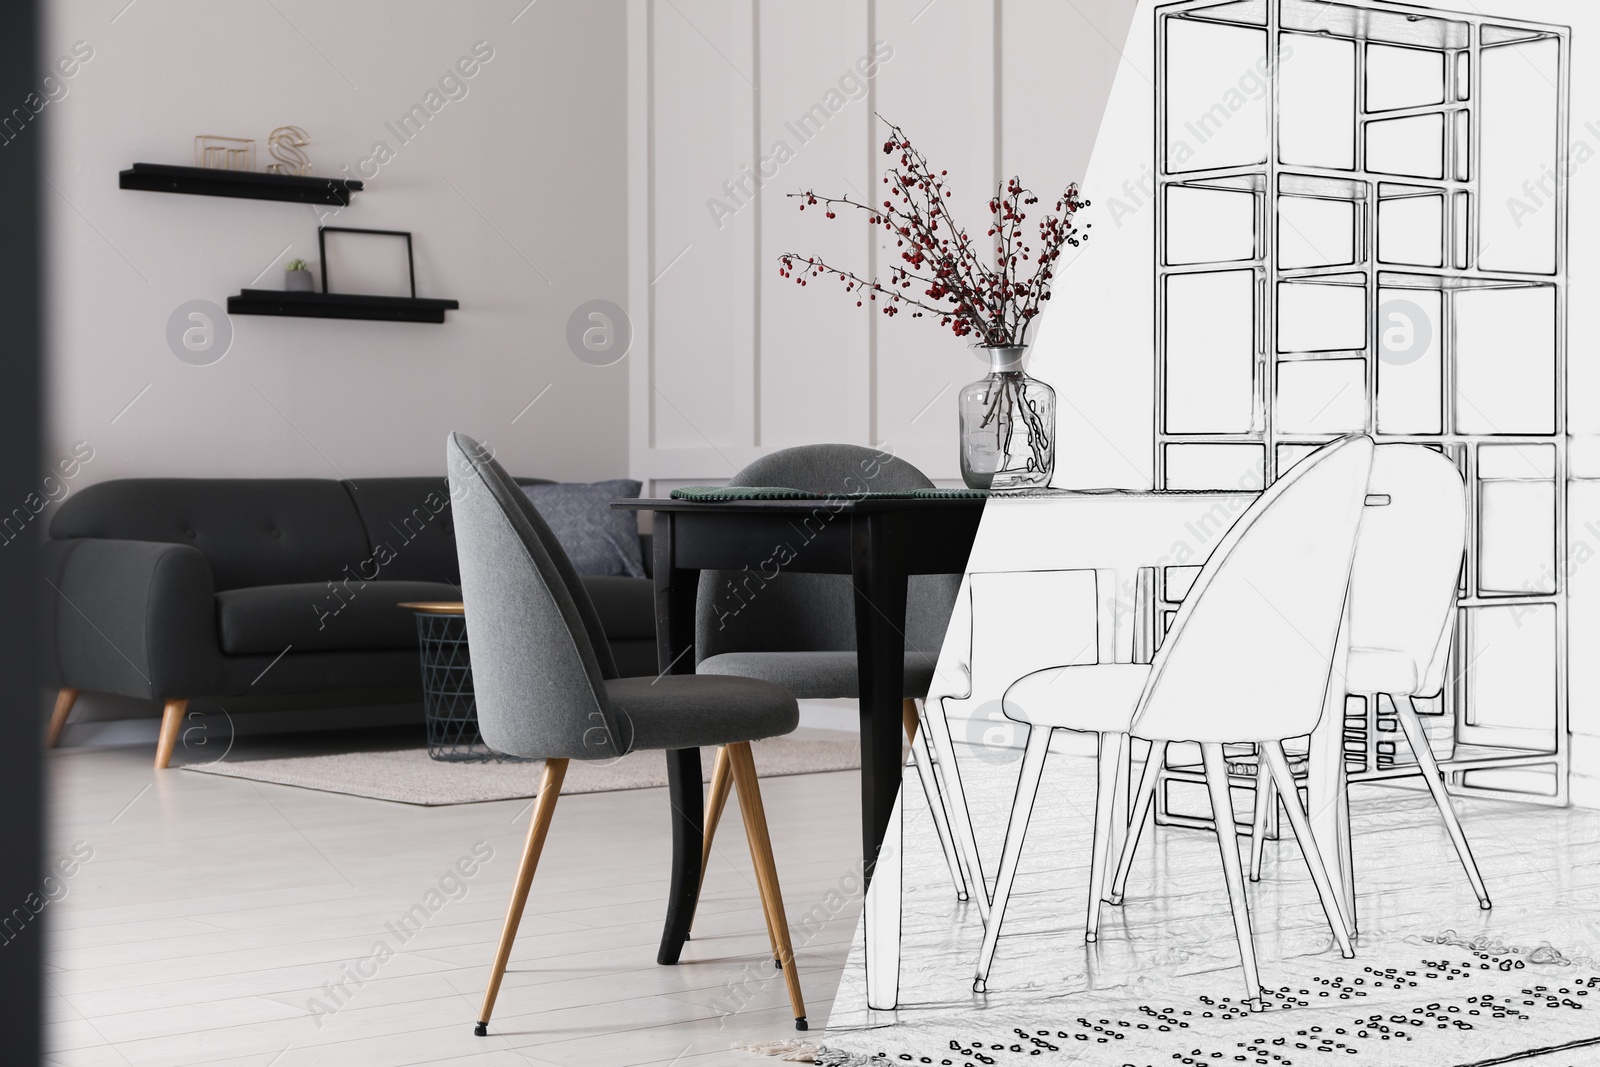 Image of From idea to realization. Beautiful apartment interior with dining area. Collage of photo and sketch